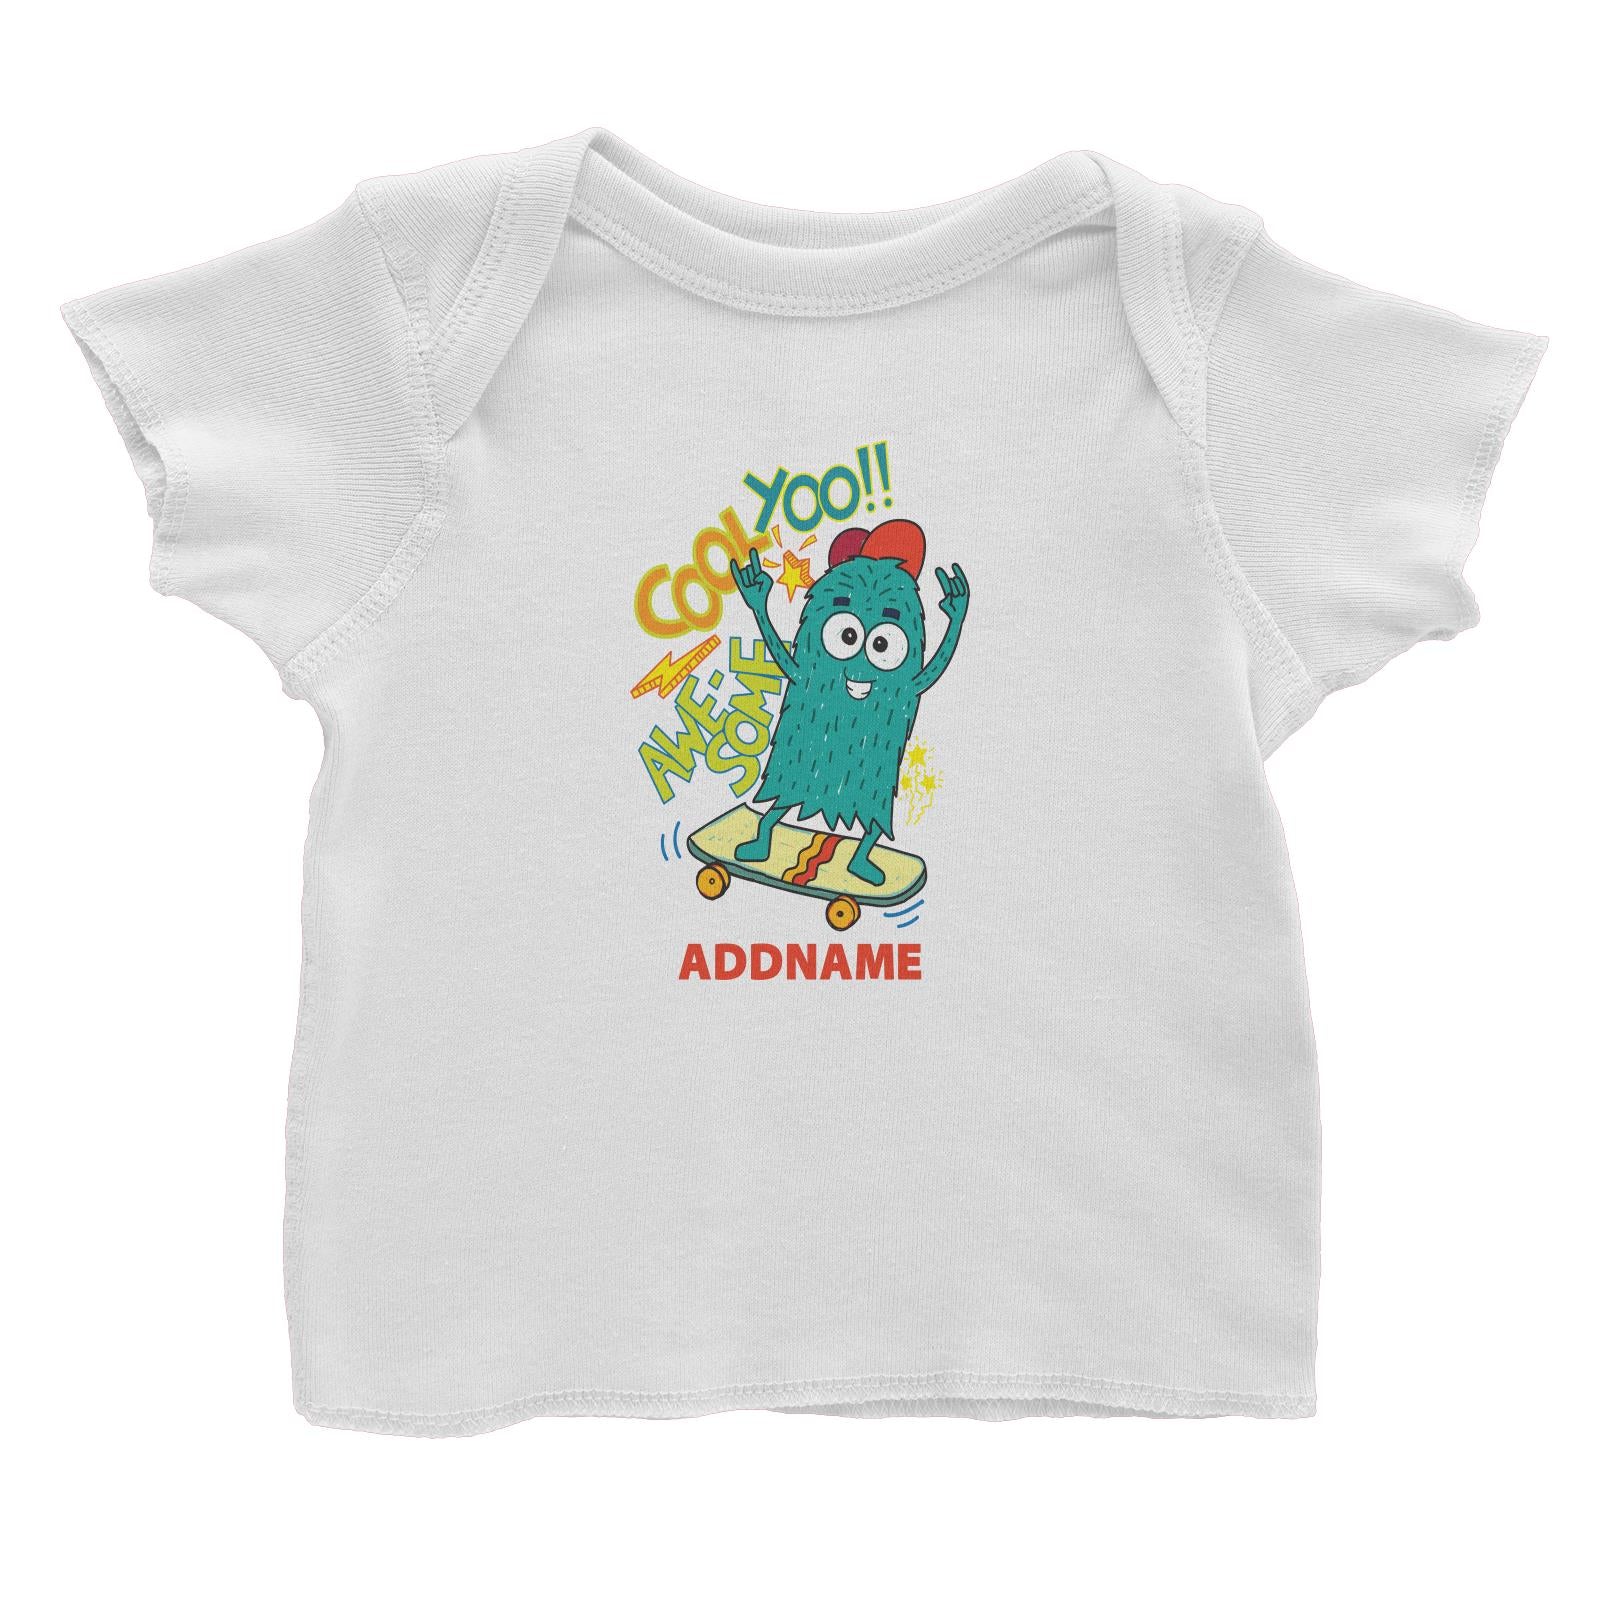 Cool Cute Monster Cool Yoo Awesome Skateboard Monster Addname Baby T-Shirt